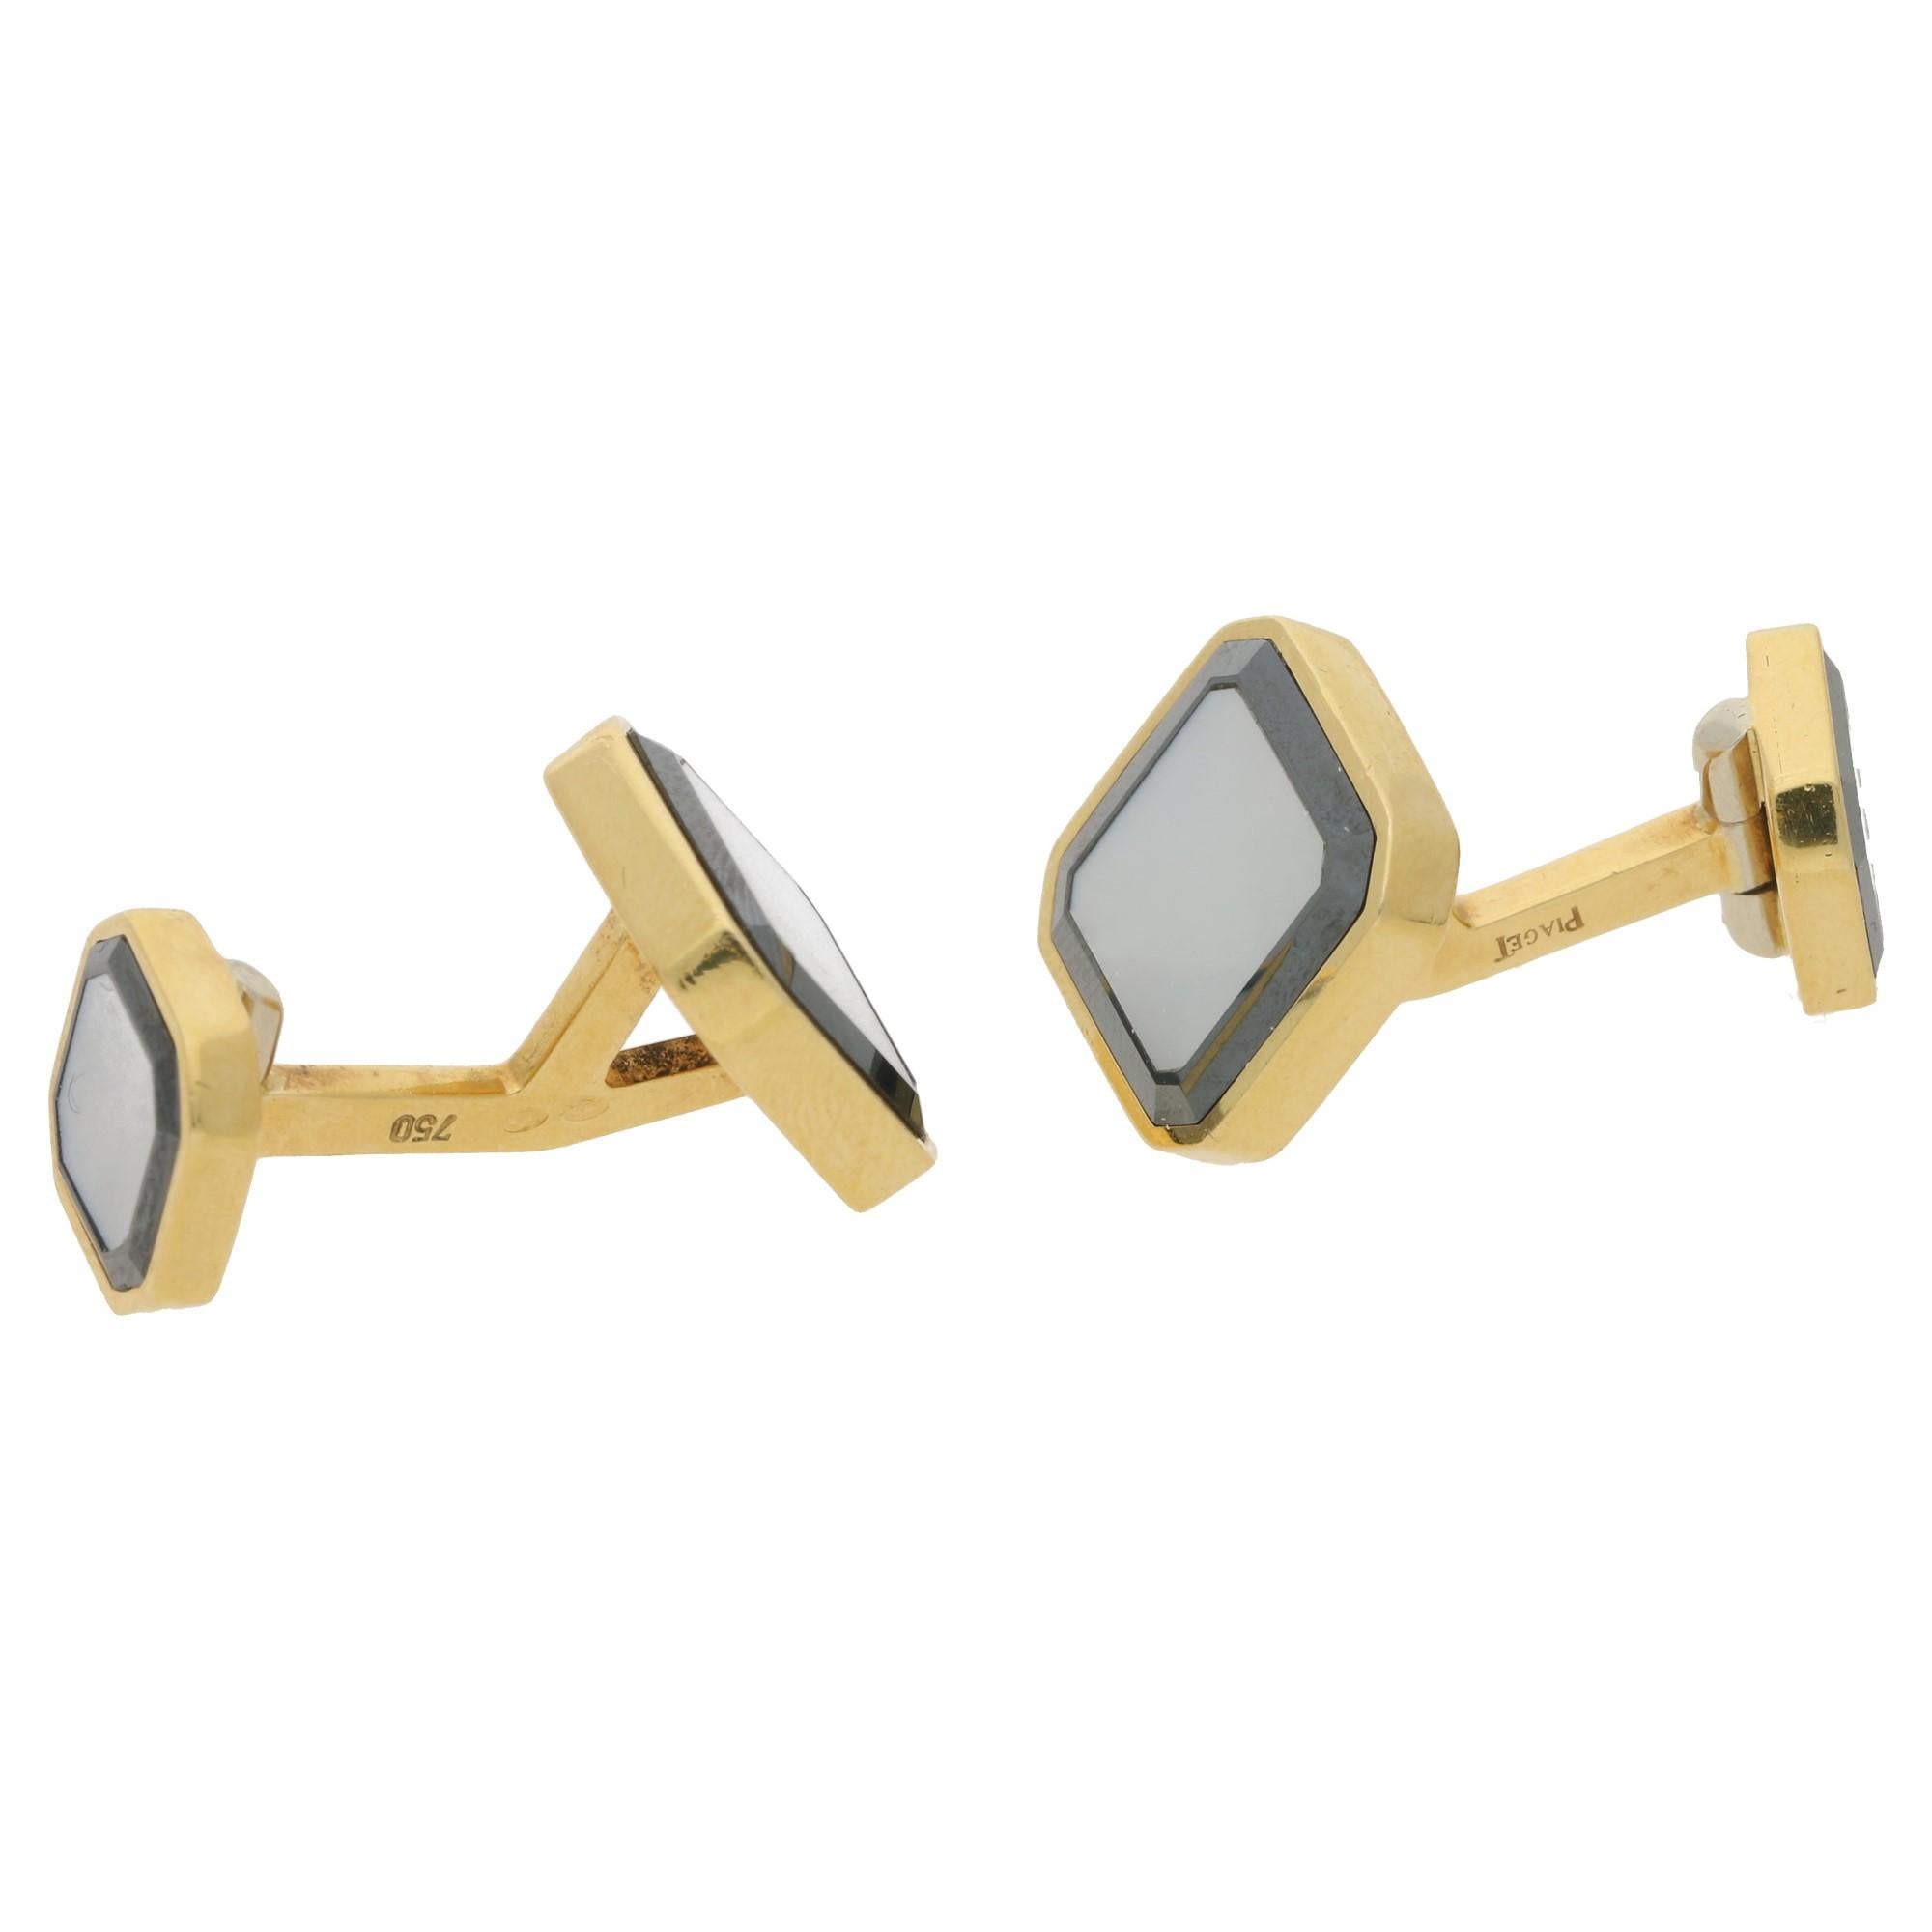 Vintage Piaget Cufflinks in 18 Carat Yellow Gold with Onyx and Mother-of-Pearl In Excellent Condition For Sale In London, GB